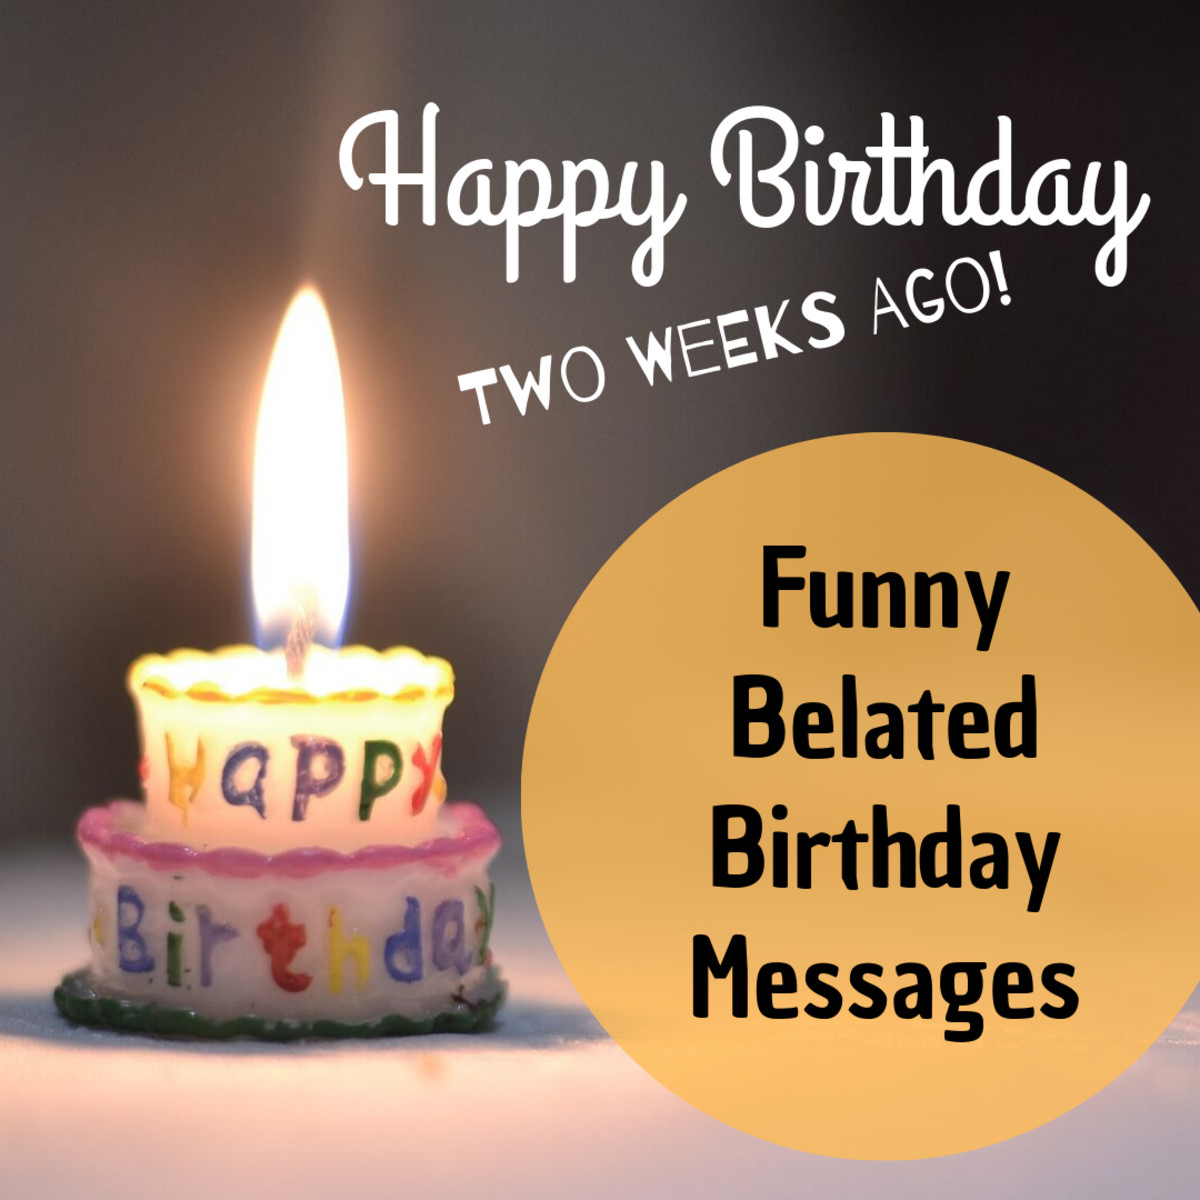 Belated Birthday Wishes Quotes
 Funny Belated Happy Birthday Wishes Late Messages and